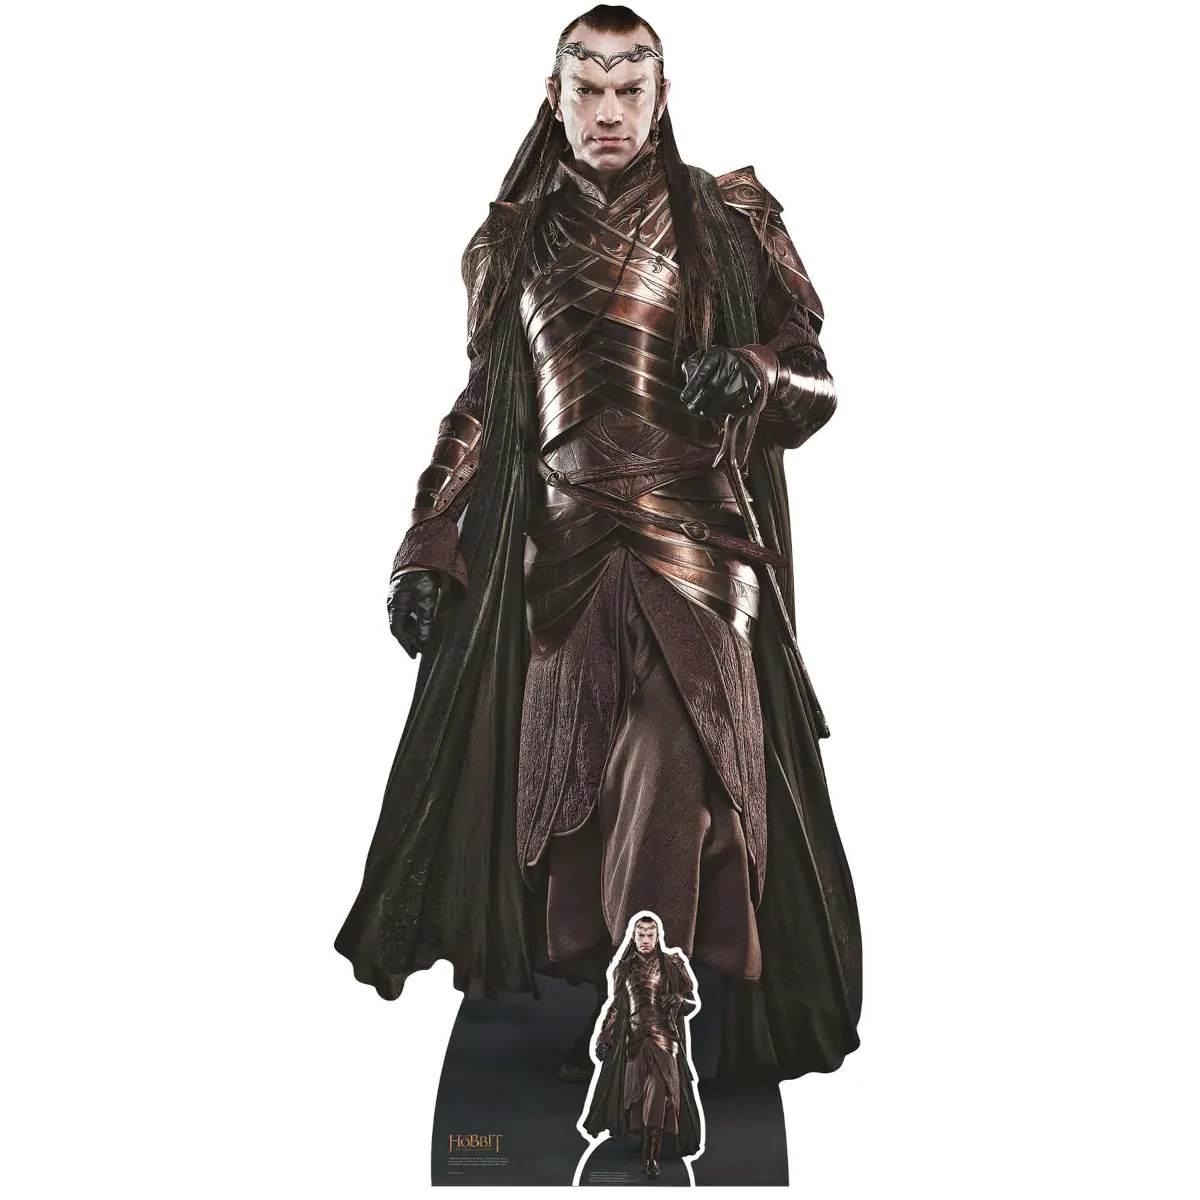 SC4136 Elrond (The Hobbit) Official Lifesize + Mini Cardboard Cutout Standee Front